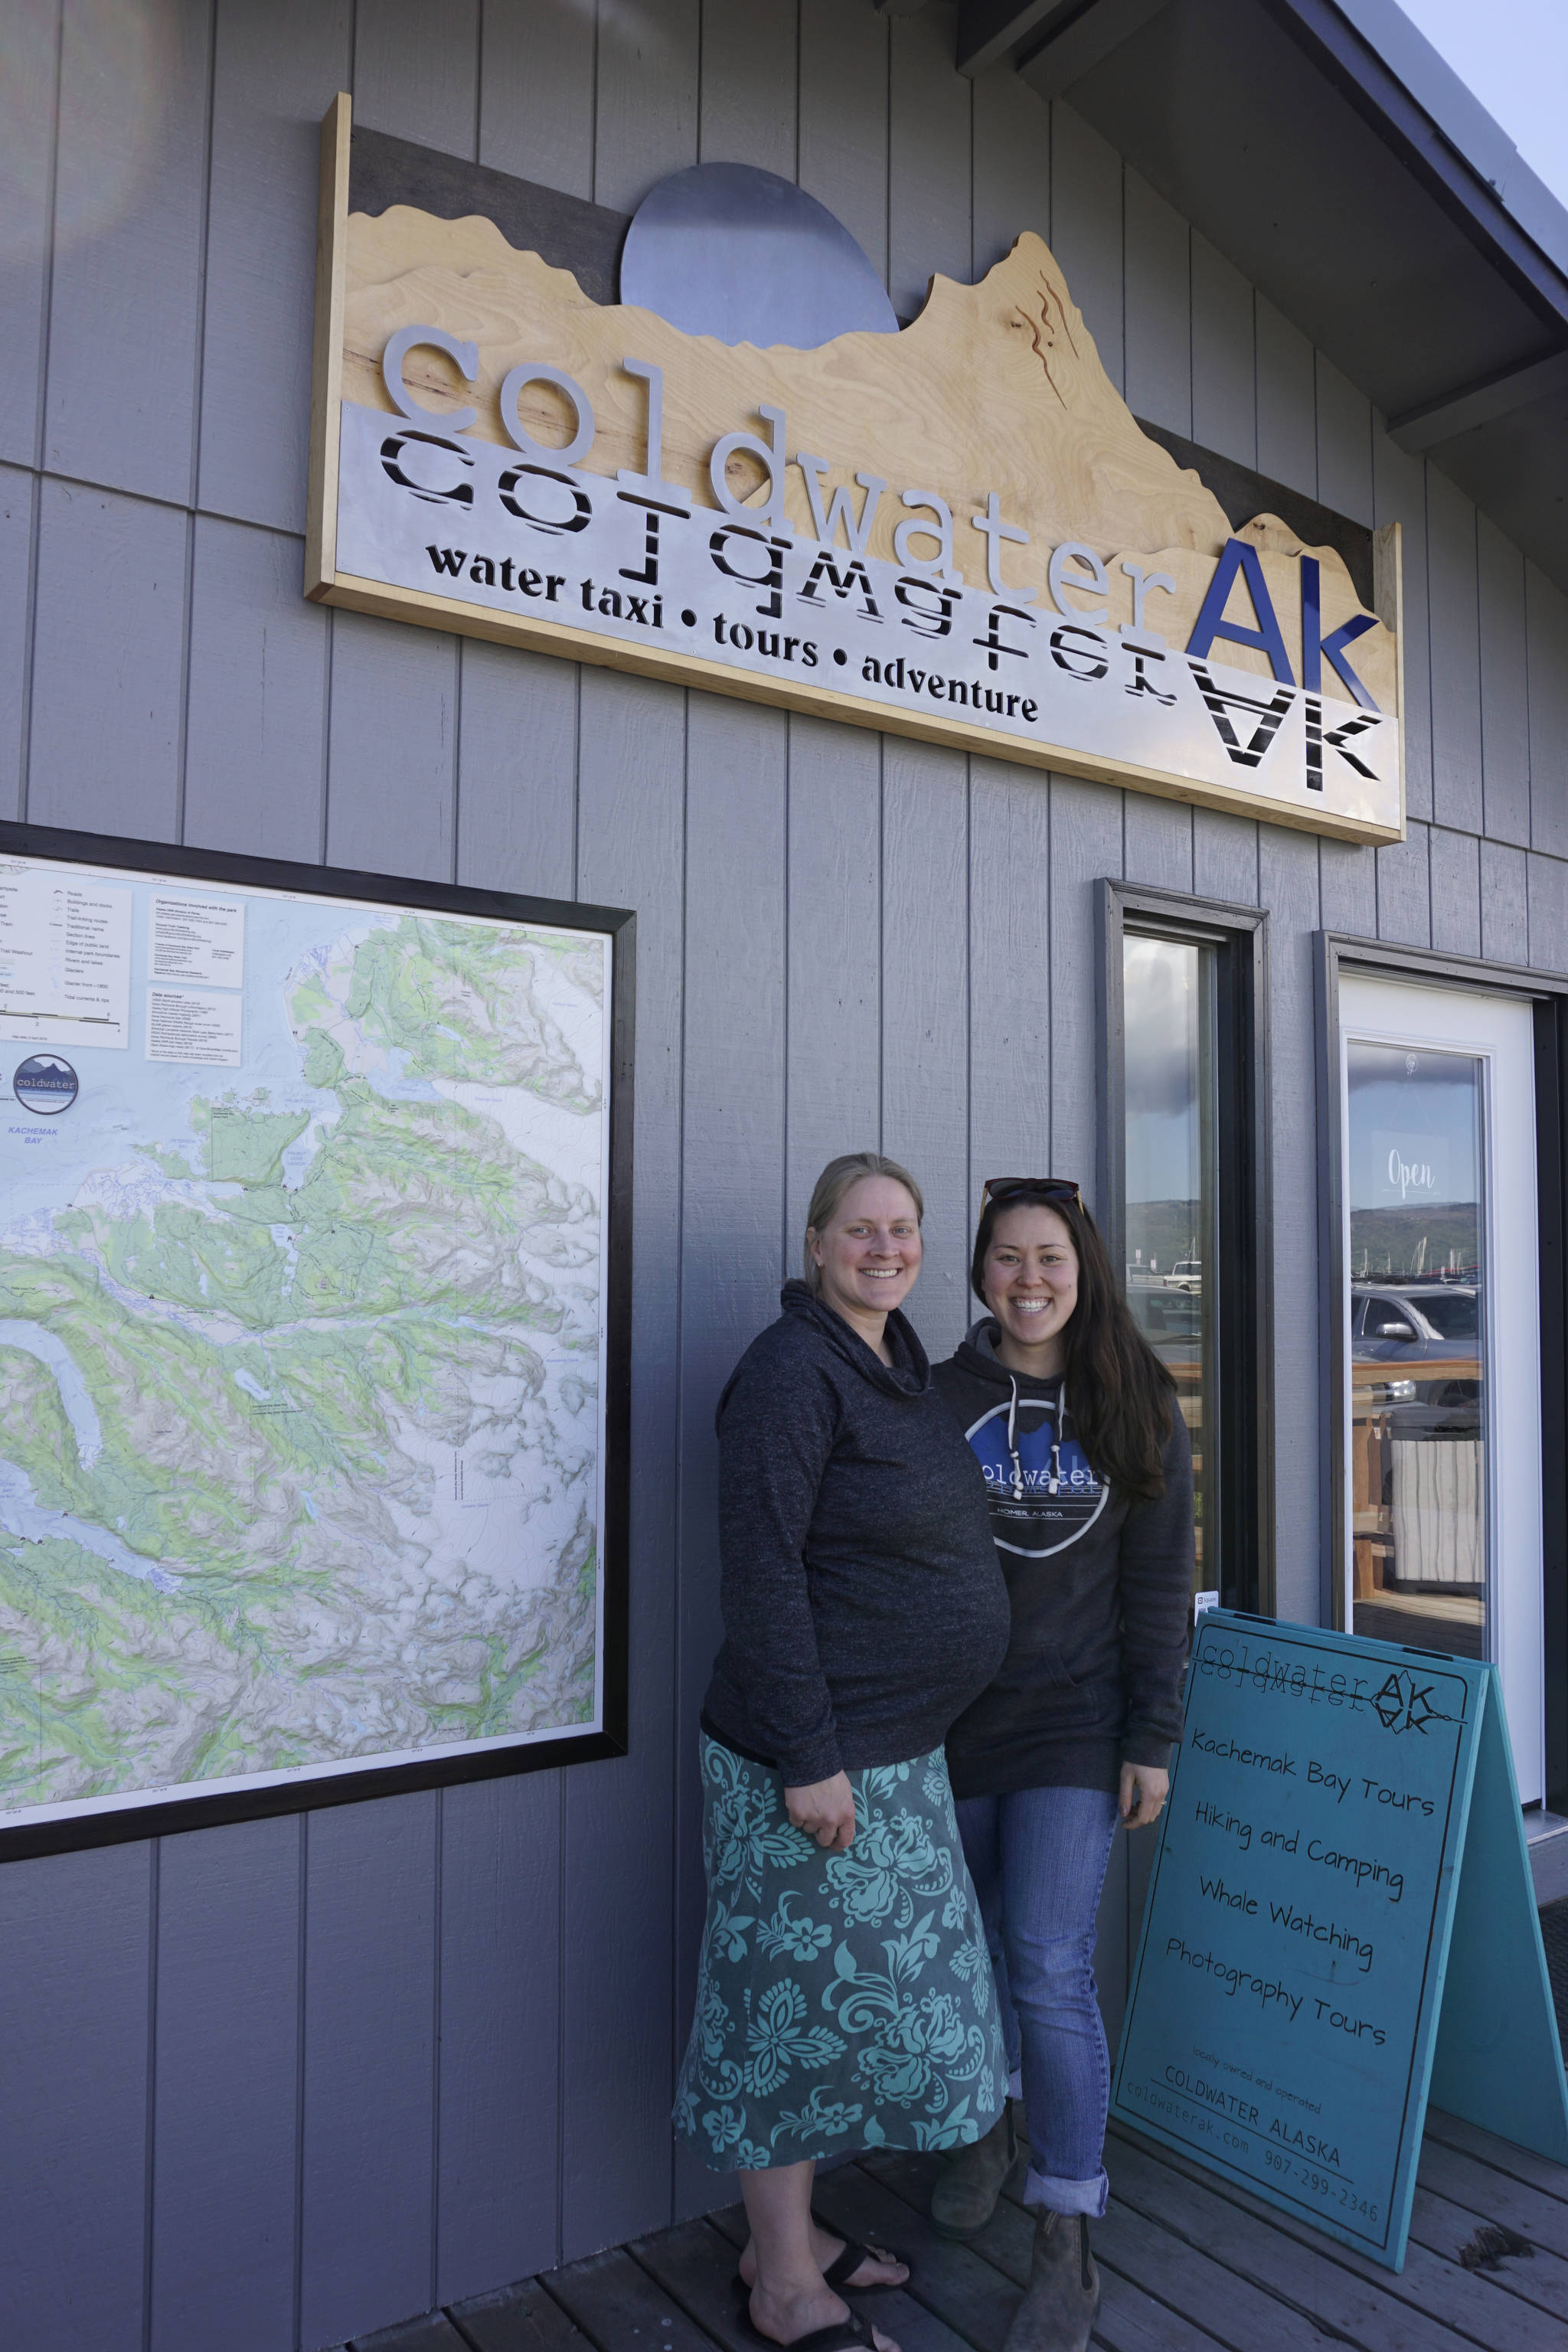 Lisa Conley, left, and Soniyae Reid, right, on Friday, June 1, 2018, stand outside the new offices of Coldwater AK water taxi and tour company in the Centra Charters Boardwalk on the Homer Spit.